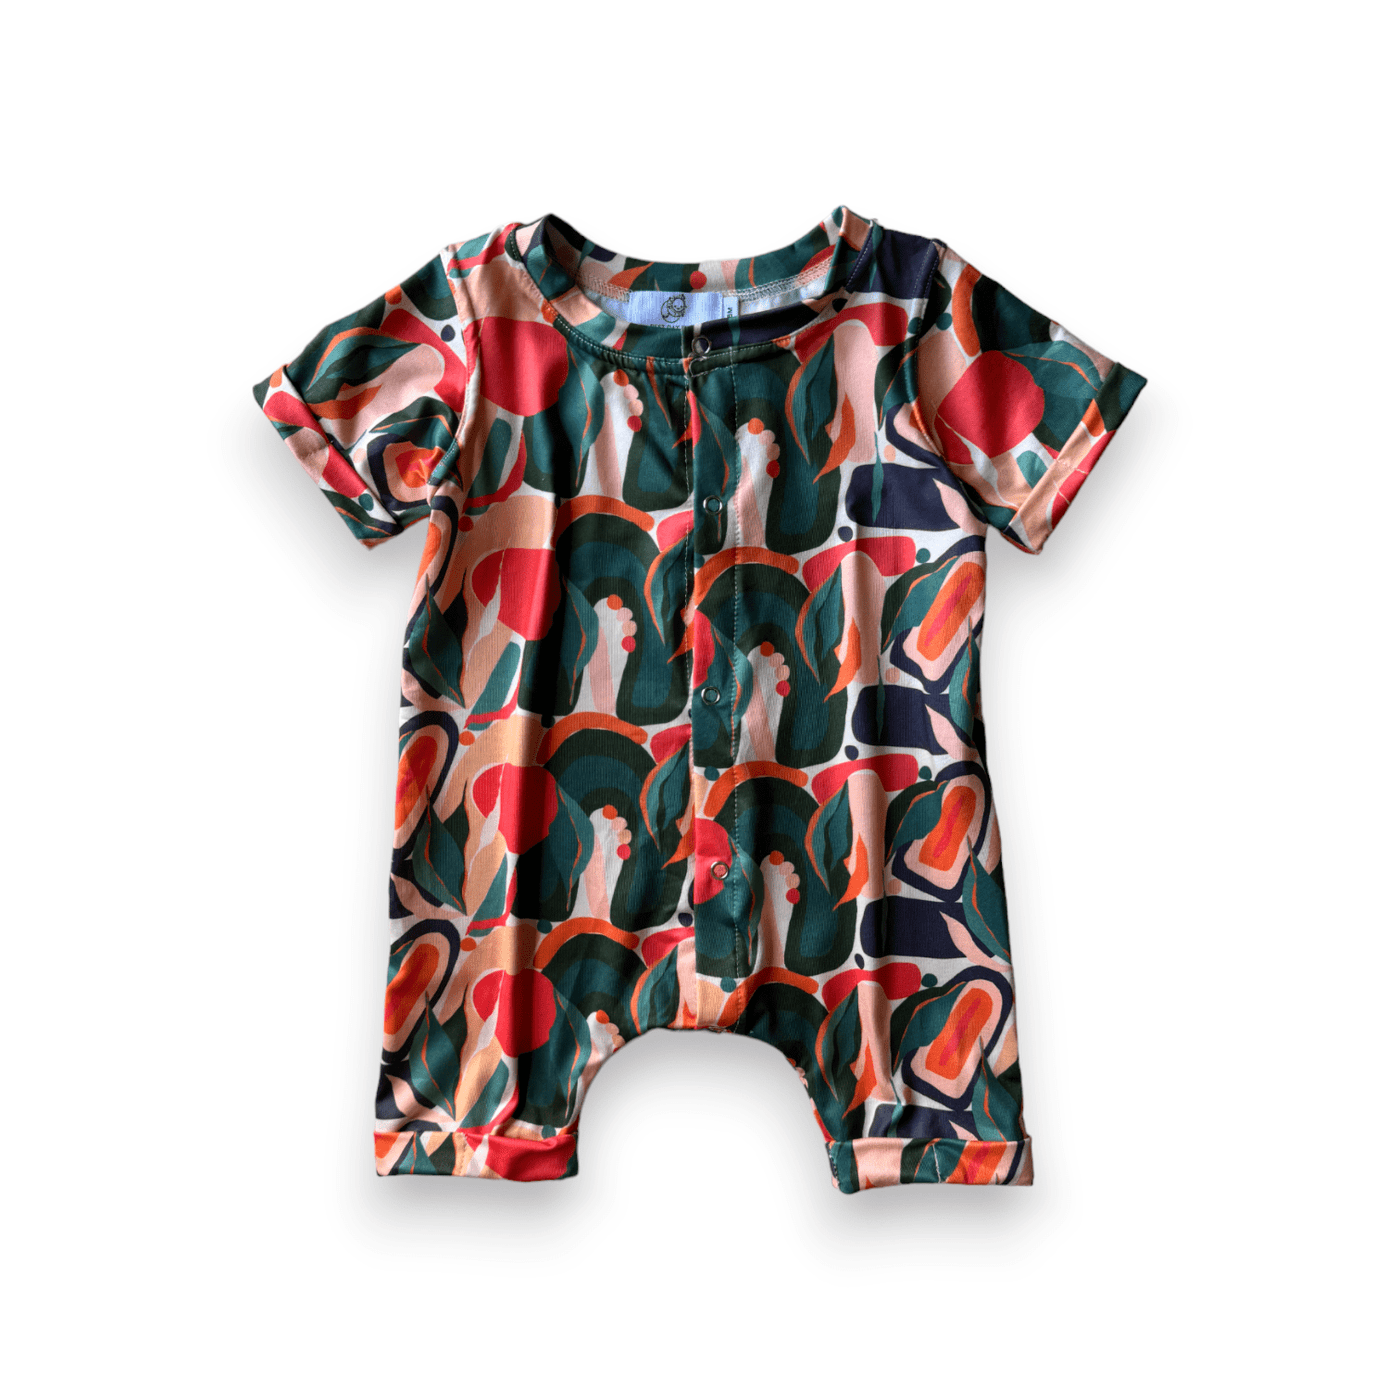 Best Day Ever Kids Baby One-Pieces Mad Men Romper buy online boutique kids clothing